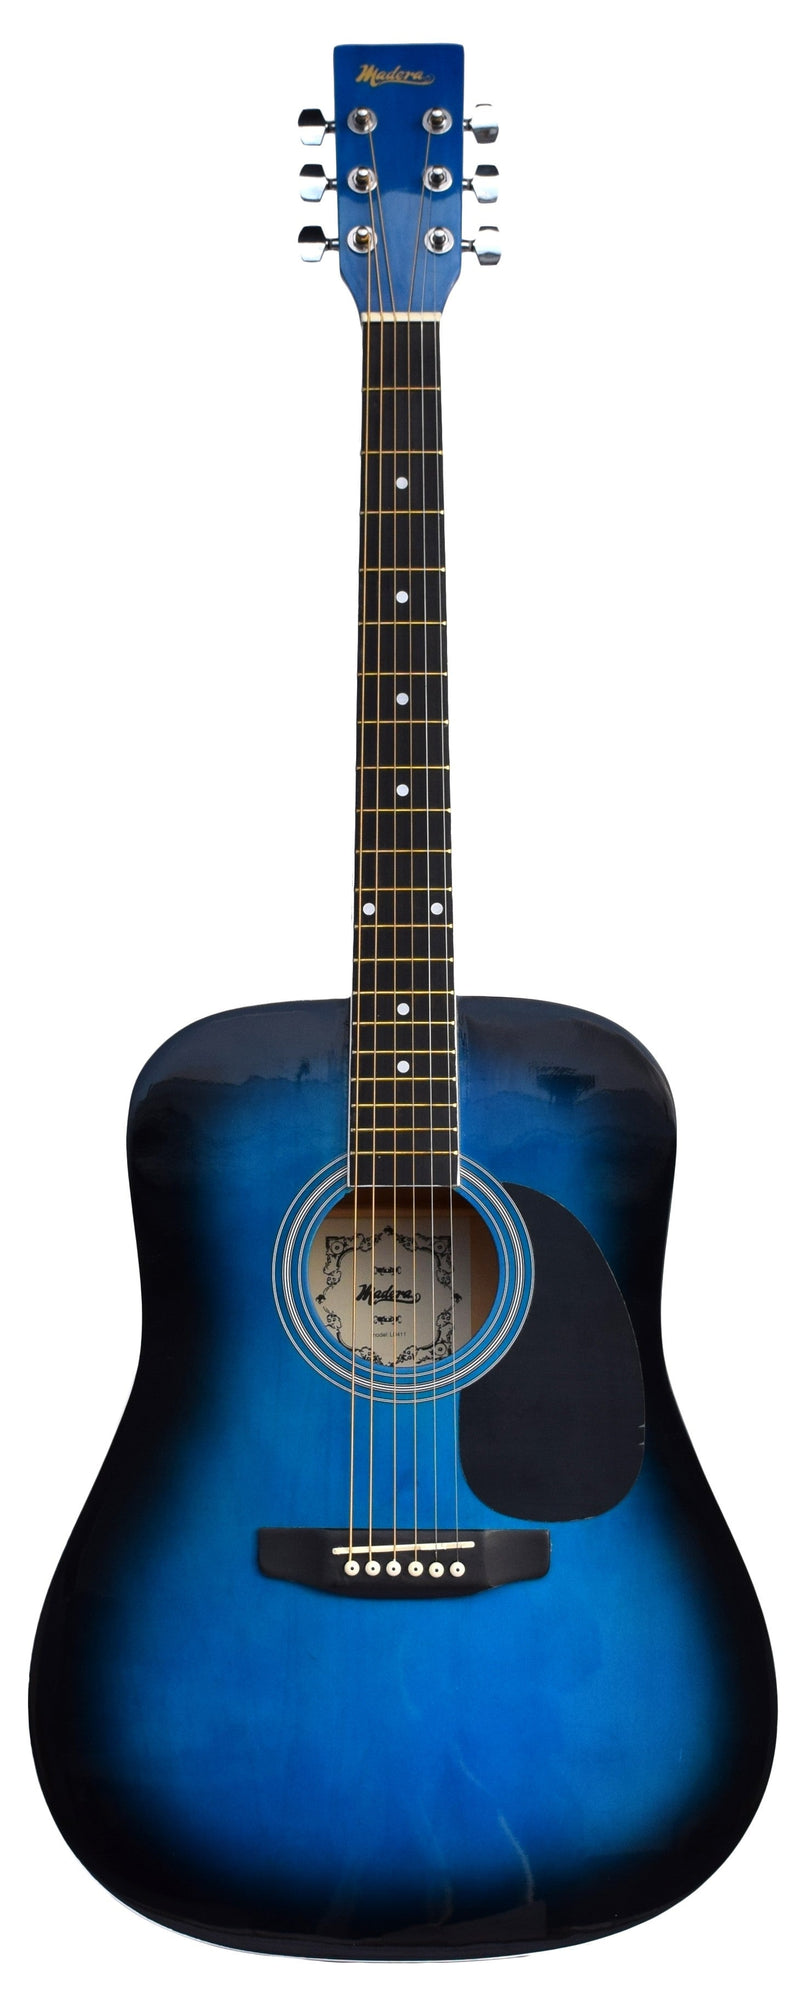 Madera LD411 Acoustic Full Size Guitar Blue Burst Madera Instrument for sale canada